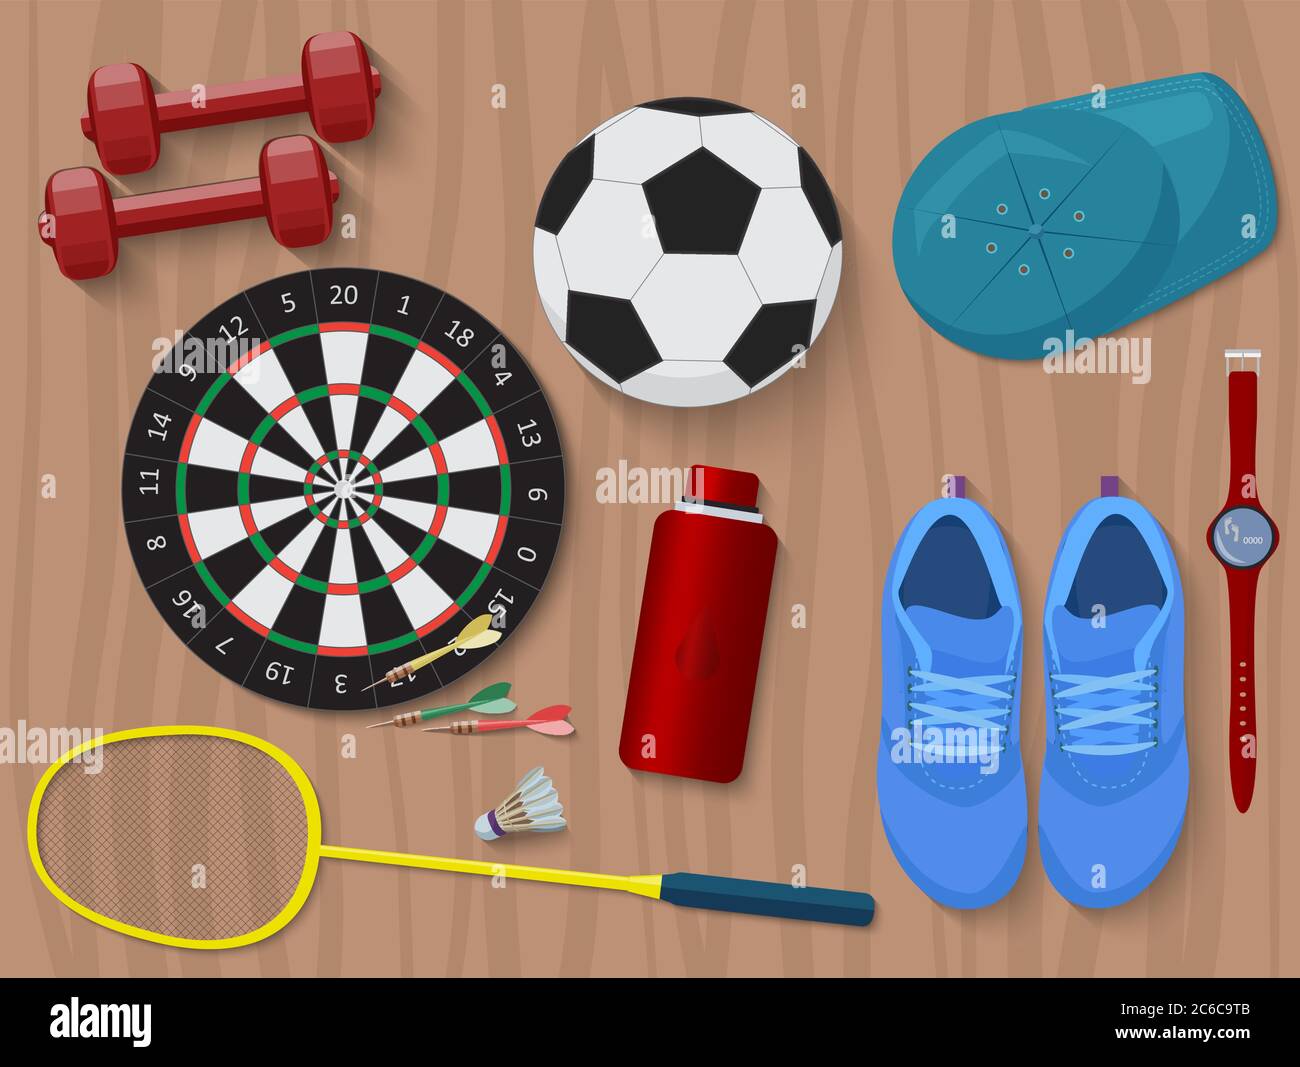 Sports equipment on wooden floor. Shoes and darts and water and dumbbells. Stock Vector